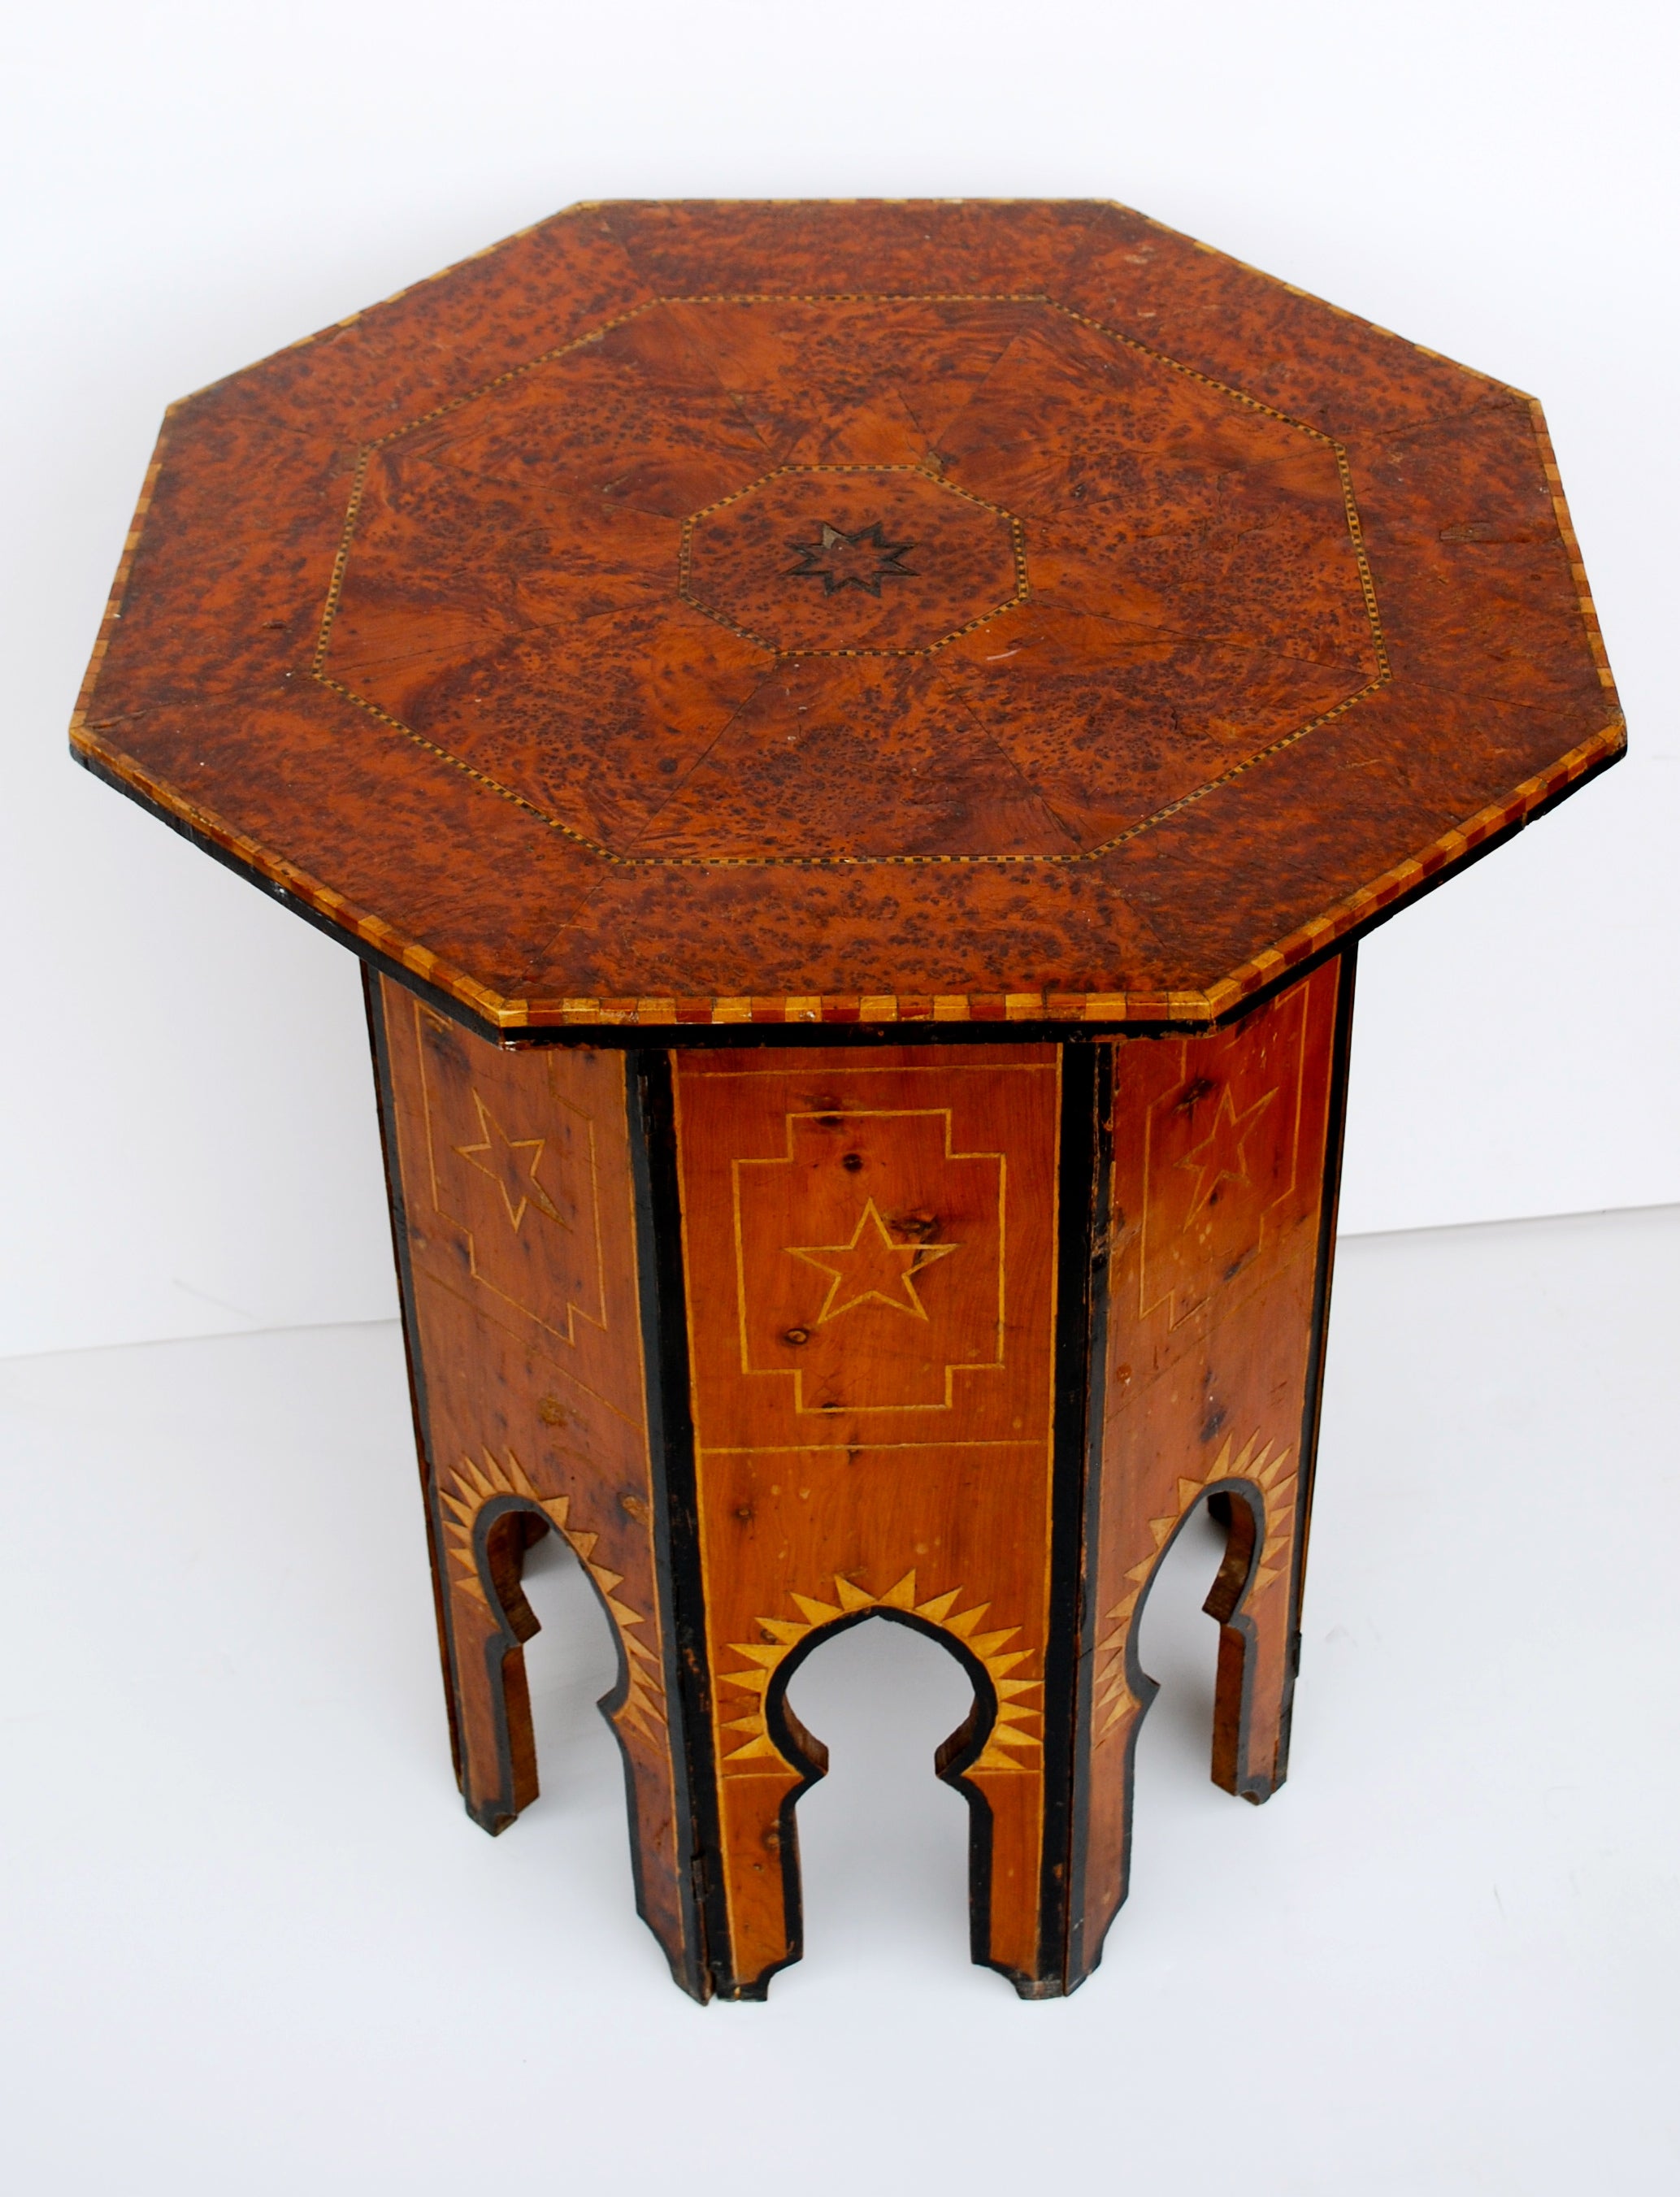 19th Century Burl Wood Moroccan Table for the French Market